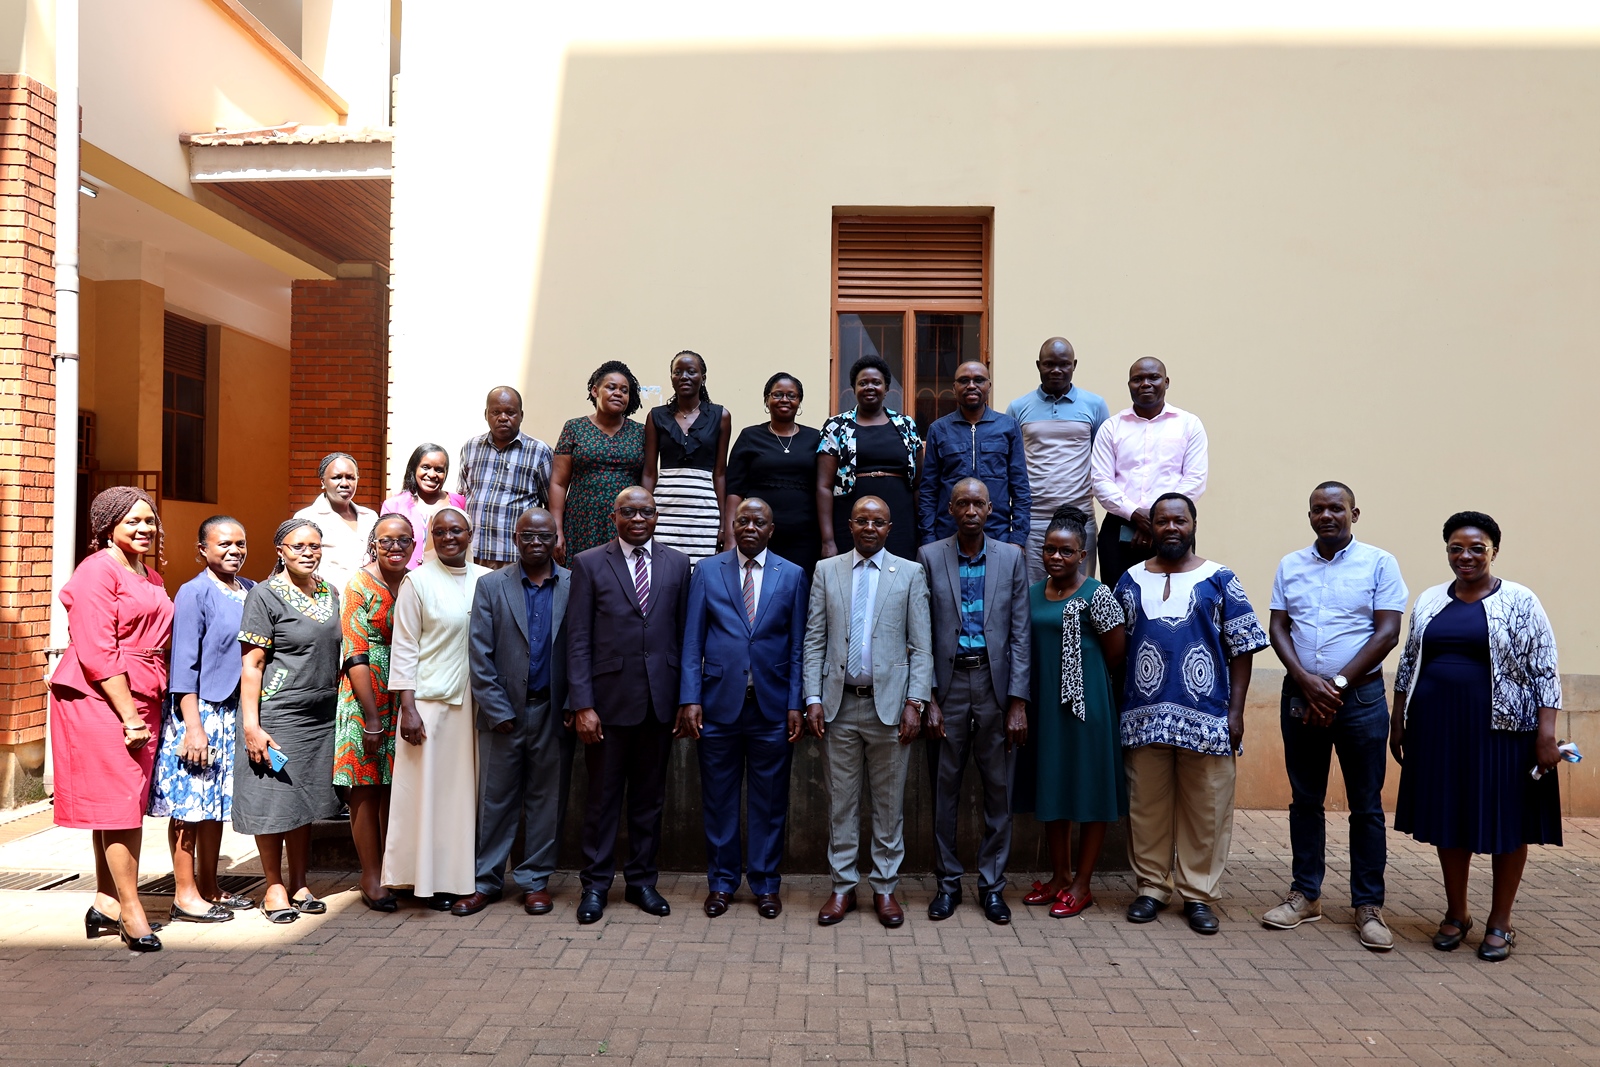 Director-DRGT-Prof. Edward Bbaale (6th R), Principal CEES-Prof. Anthony M. Mugagga (5th R) and Deputy Principal CEES-Prof. Ronald Bisaso (7th L) with officials and staff at the opening ceremony of the two-day training in graduate supervision held on 10th August 2023, CEDAT Conference Hall, Makerere University. Kampala Uganda, East Africa.